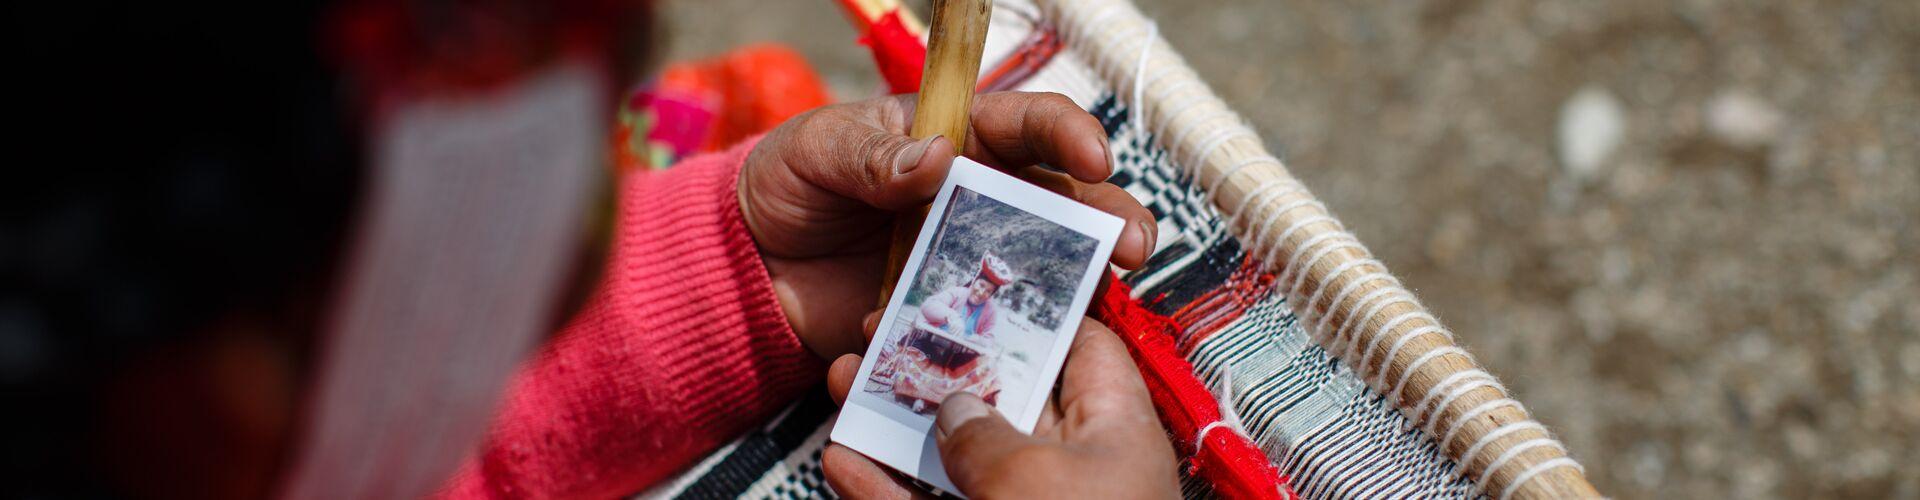 Hand holding a polaroid picture of Peruvian woman